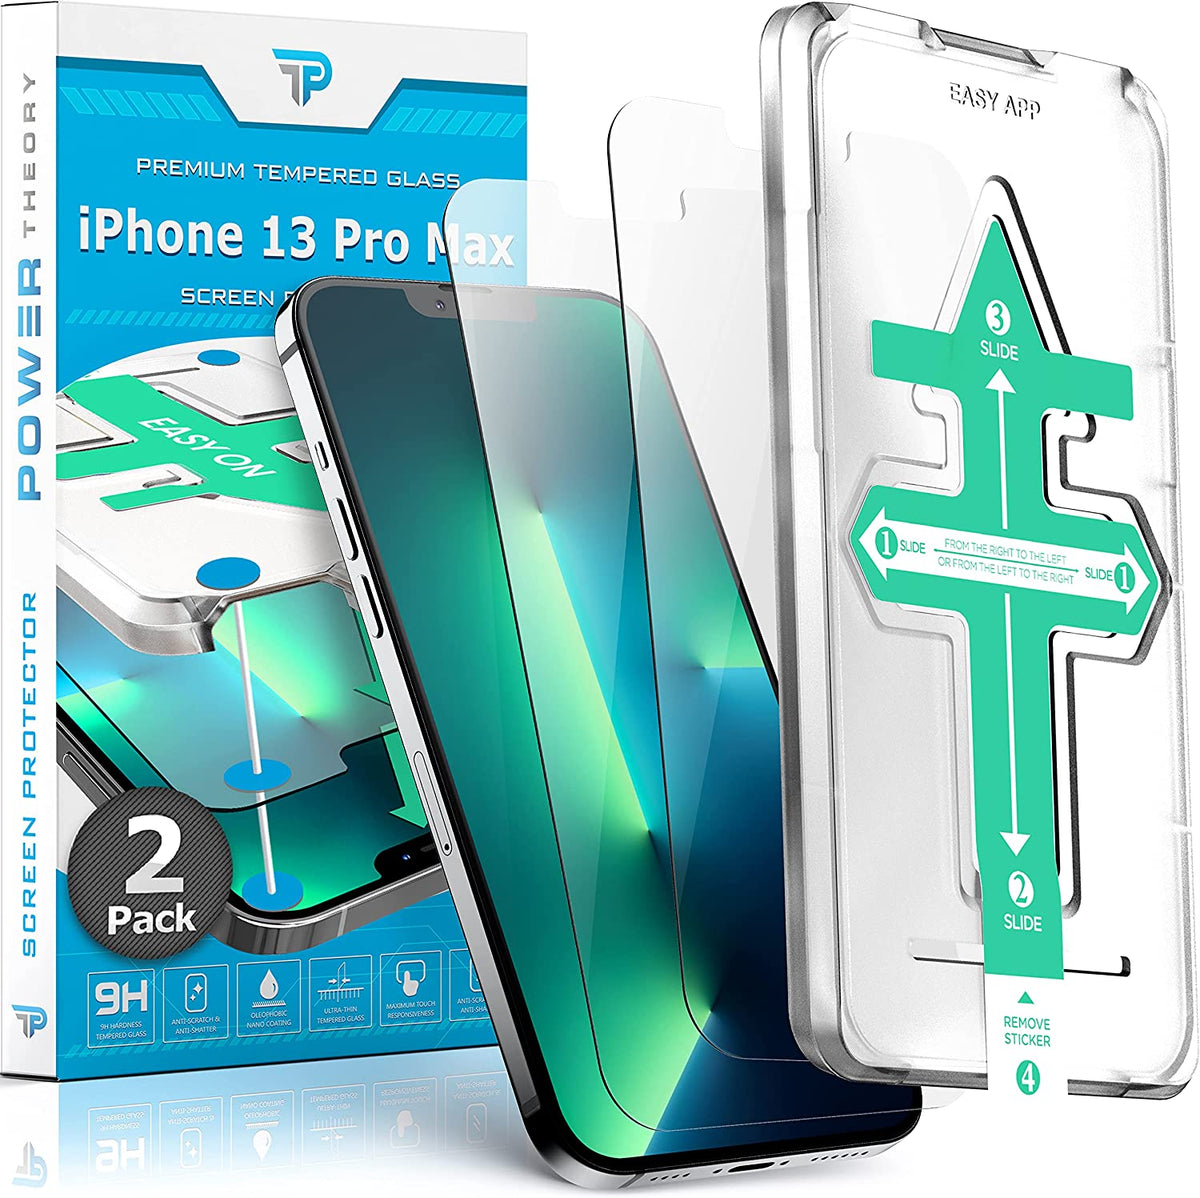 iPhone 13 Pro Max Tempered Glass Screen Protector [2-Pack] Cover